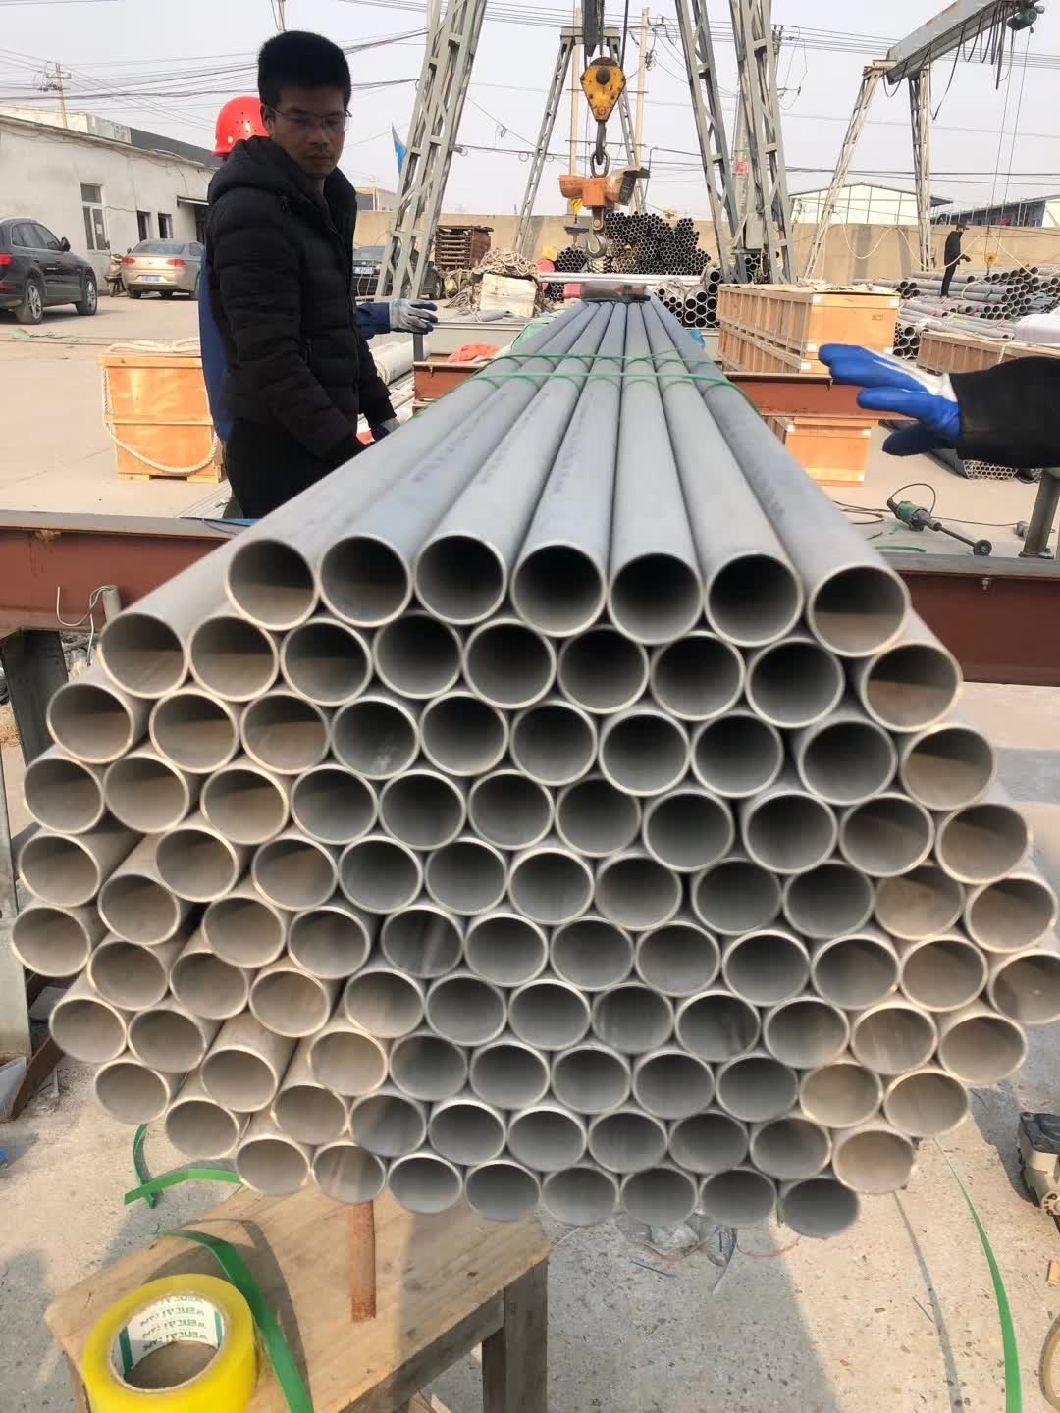 with Excellent High Temperature Resistance ASME Inconel 600 Nickel Alloy Pipe Uns N06600 Seamless Pipe